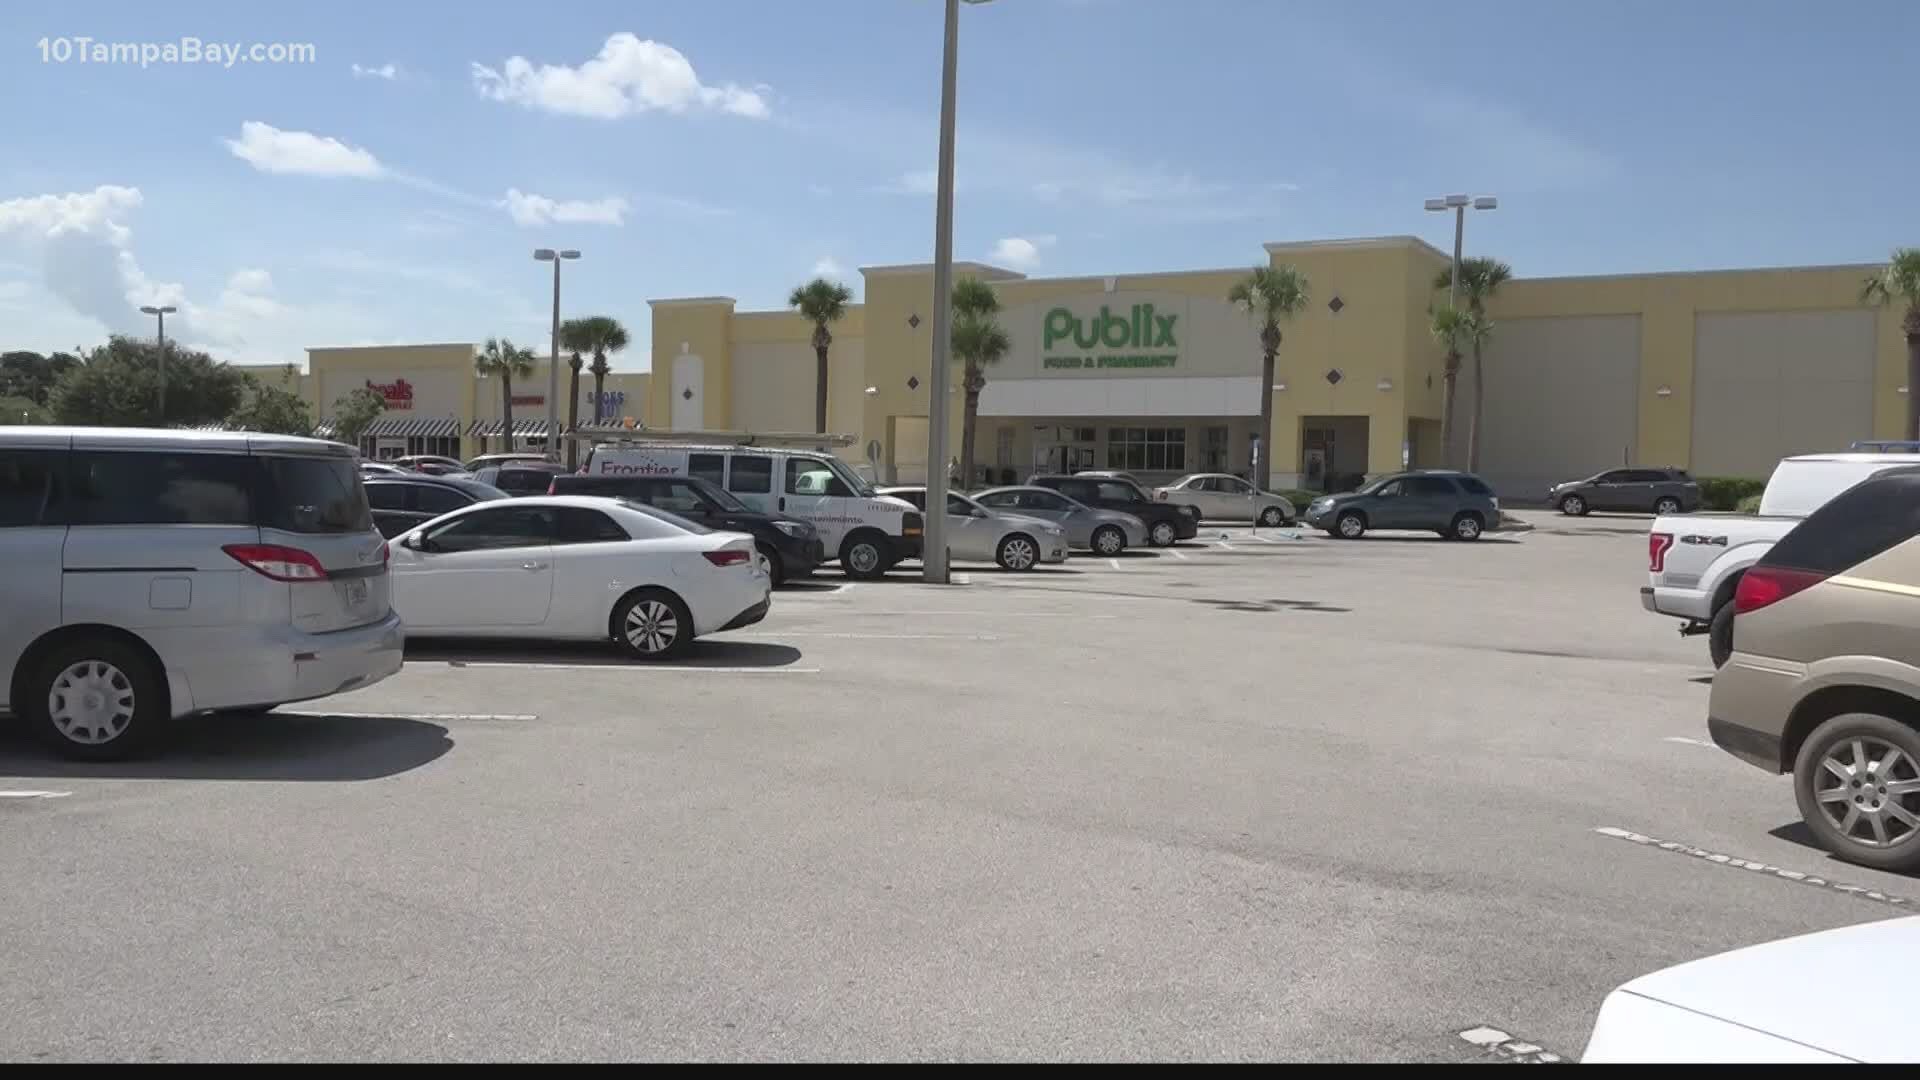 Publix has become the latest major chain of stores to require customers to wear face coverings at all times while shopping inside.